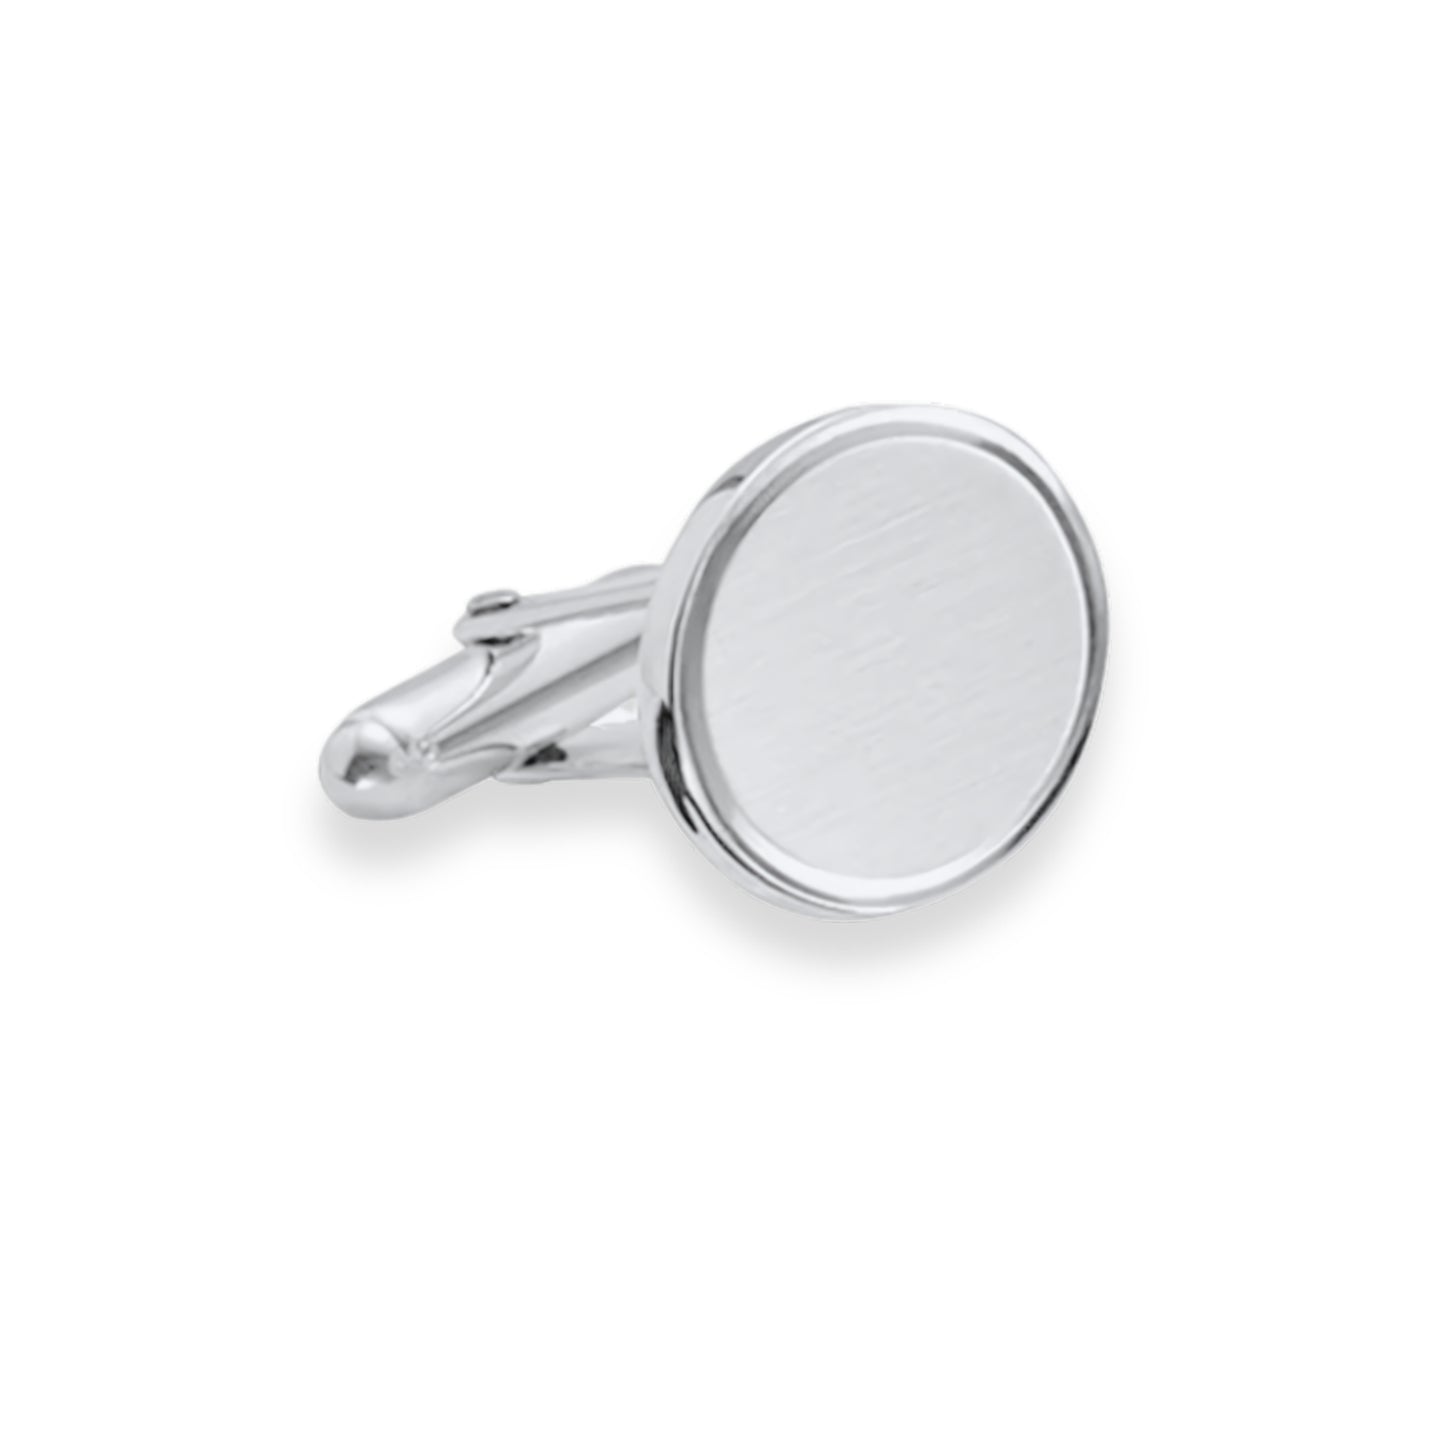 Sterling Silver Oval Cufflinks with Brushed Finish